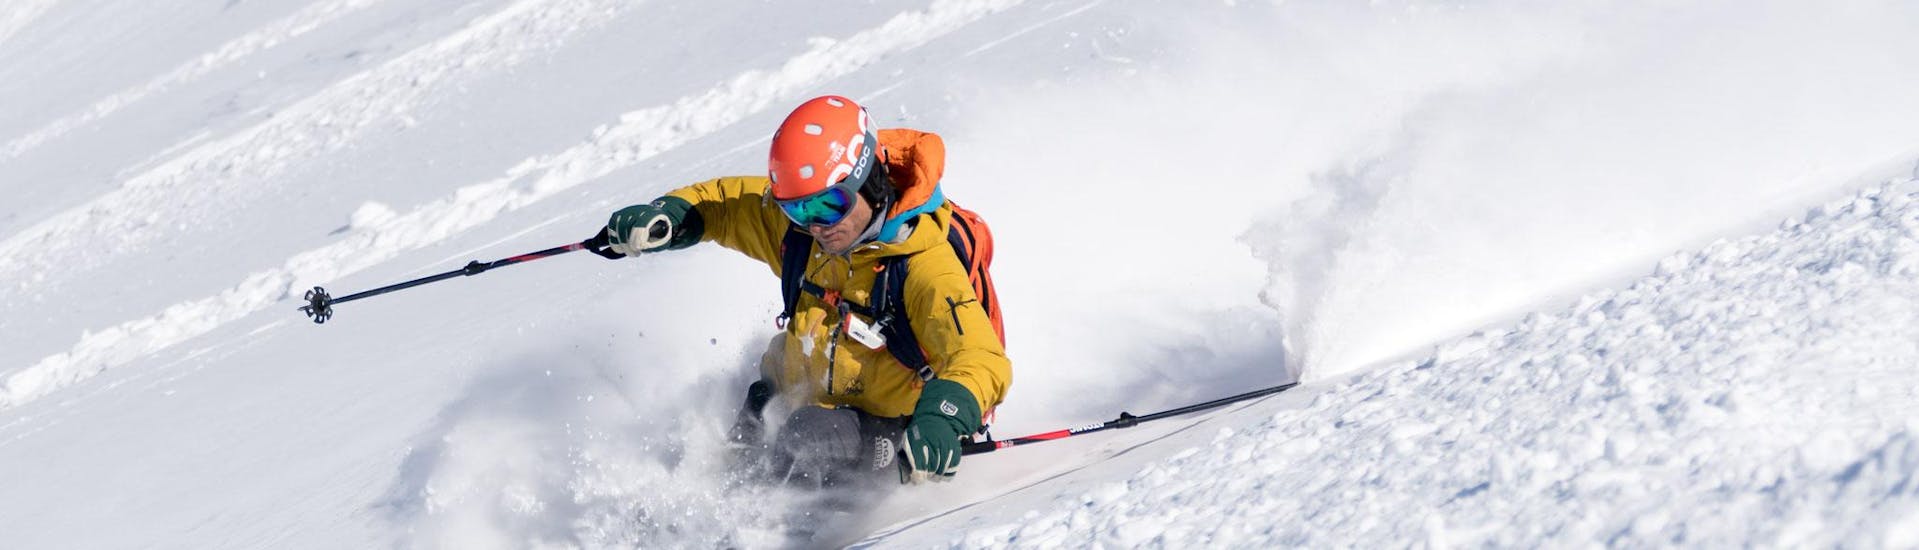 Private Off-Piste Skiing Tours for All Levels.